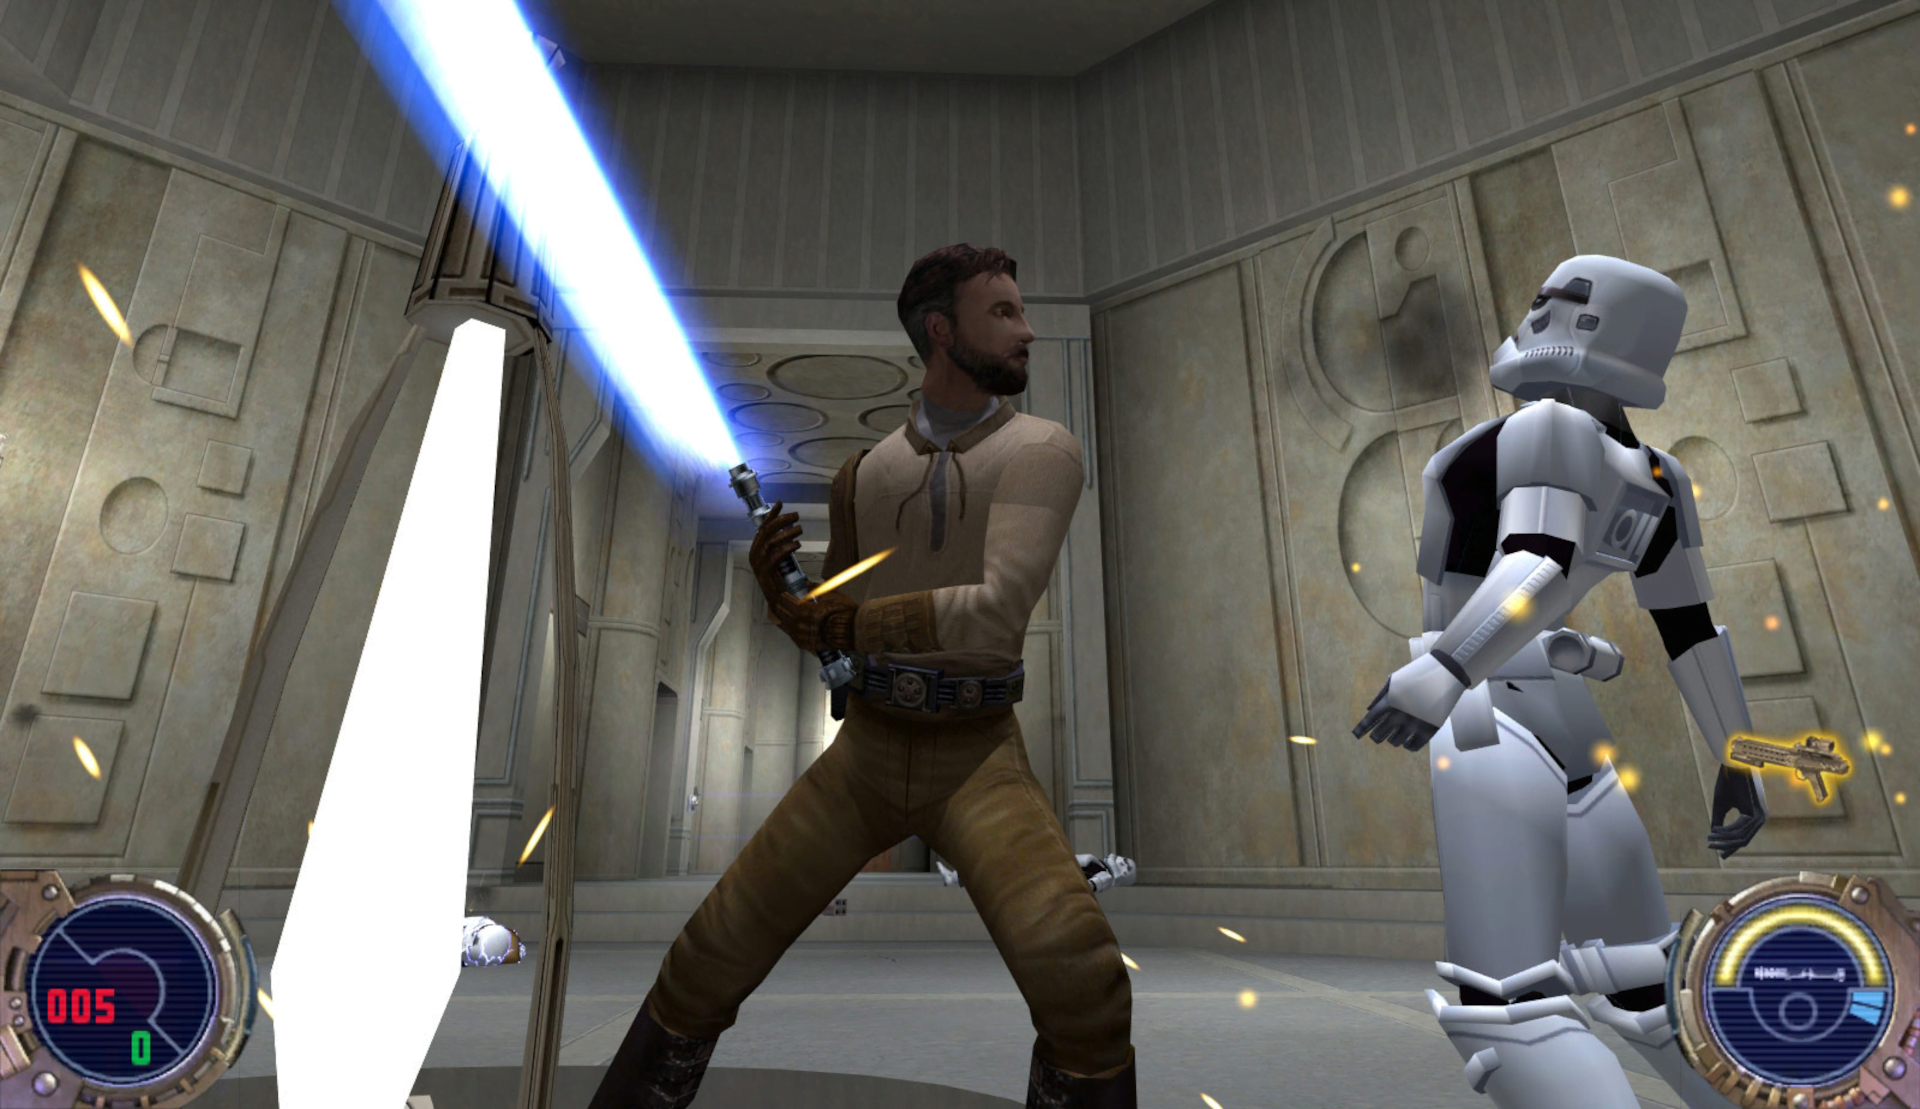 Star Wars Jedi Knight II: Shooter port for Meta Quest released